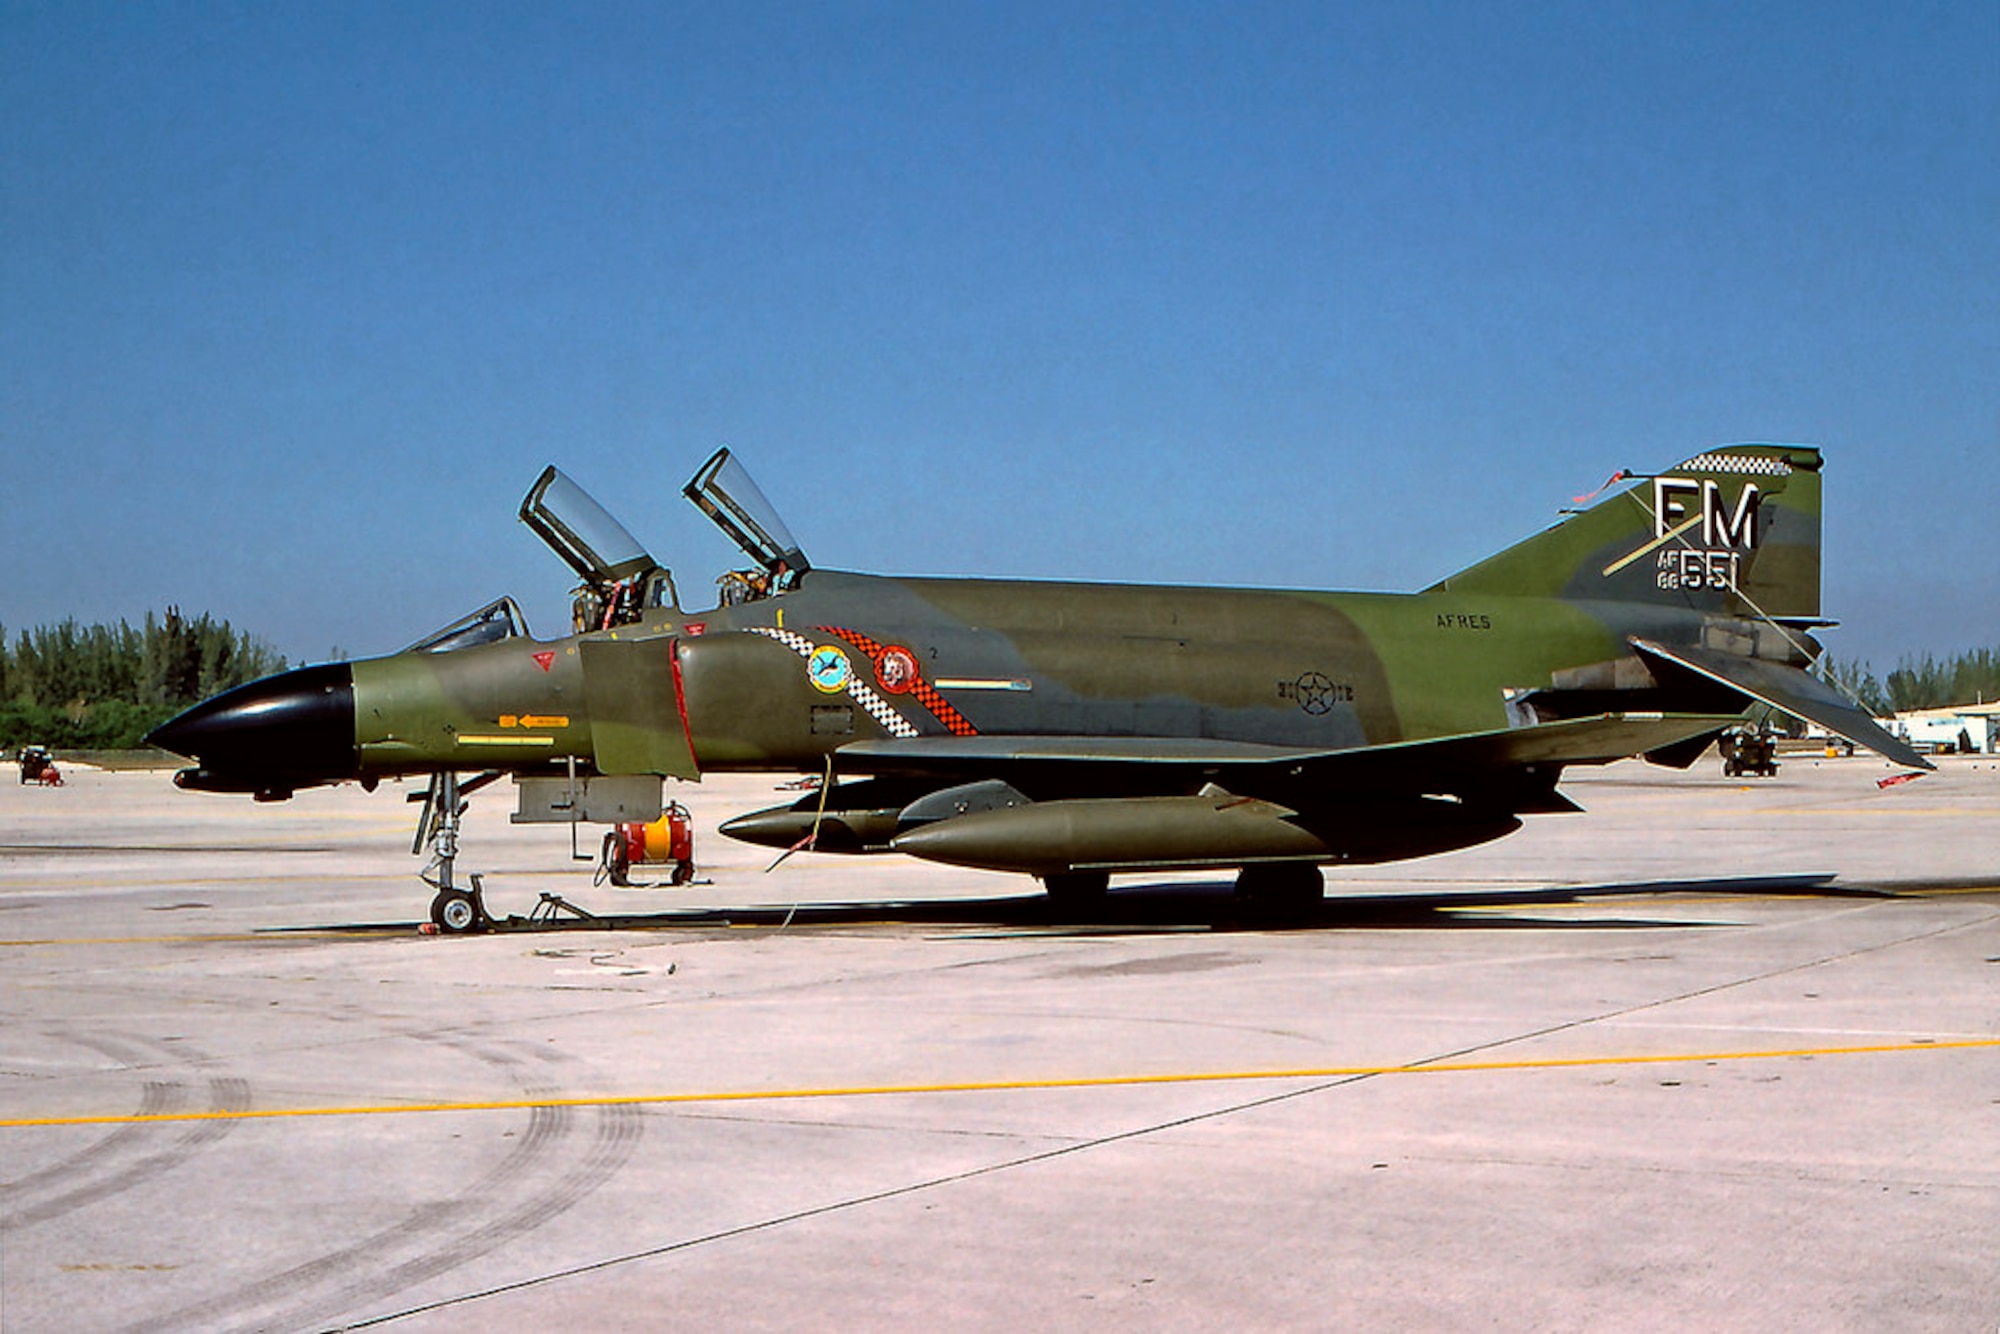 An F-4 Phantom II aircraft assigned to the 482nd Fighter Wing is parked on the flightline at Homestead Air Force Base, Fla., during the 1980's. (Courtesy photo)